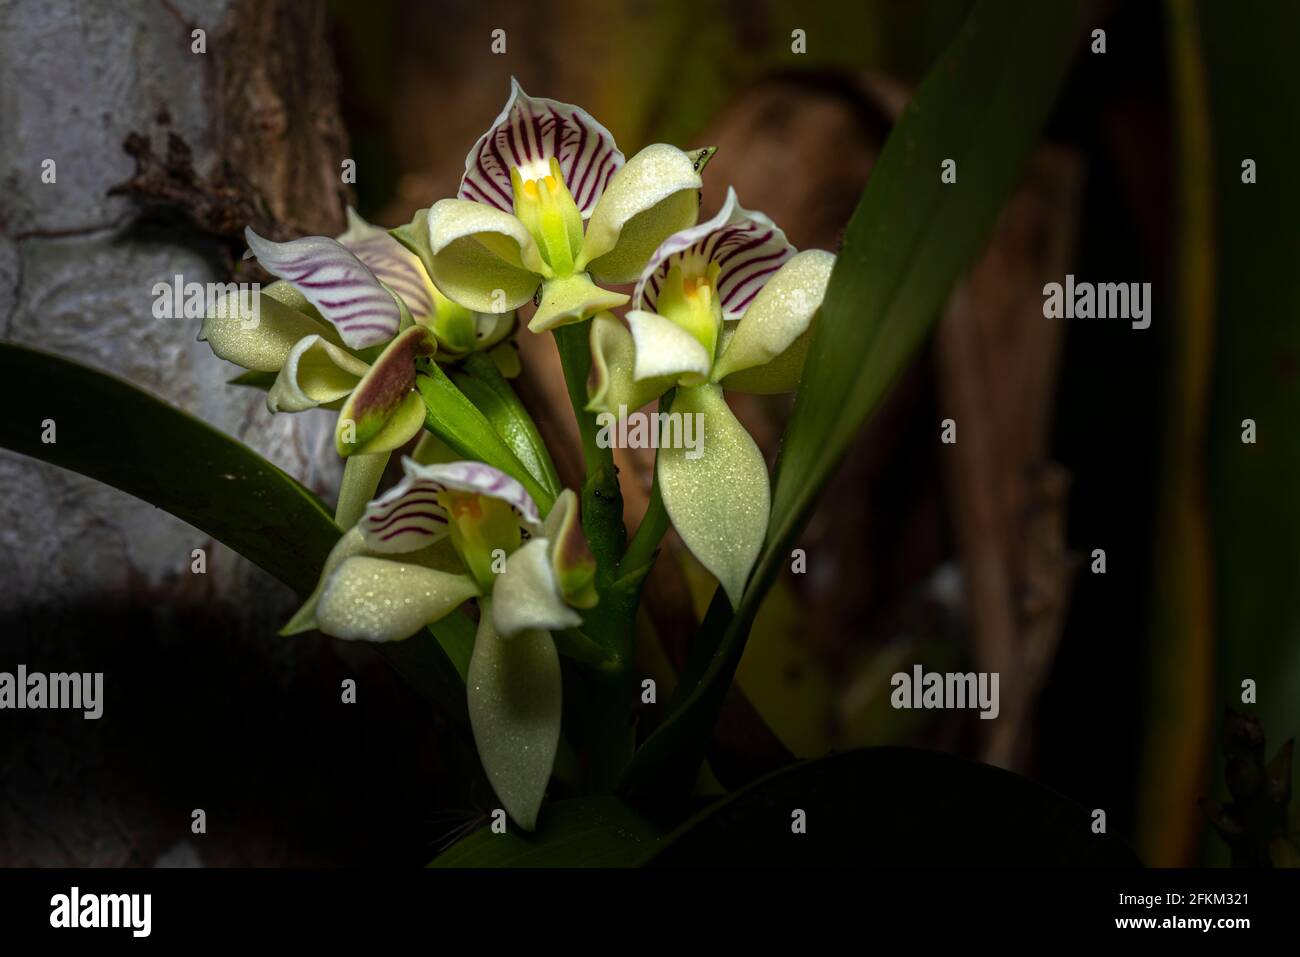 Prosthechea chacoensis orchid Stock Photo